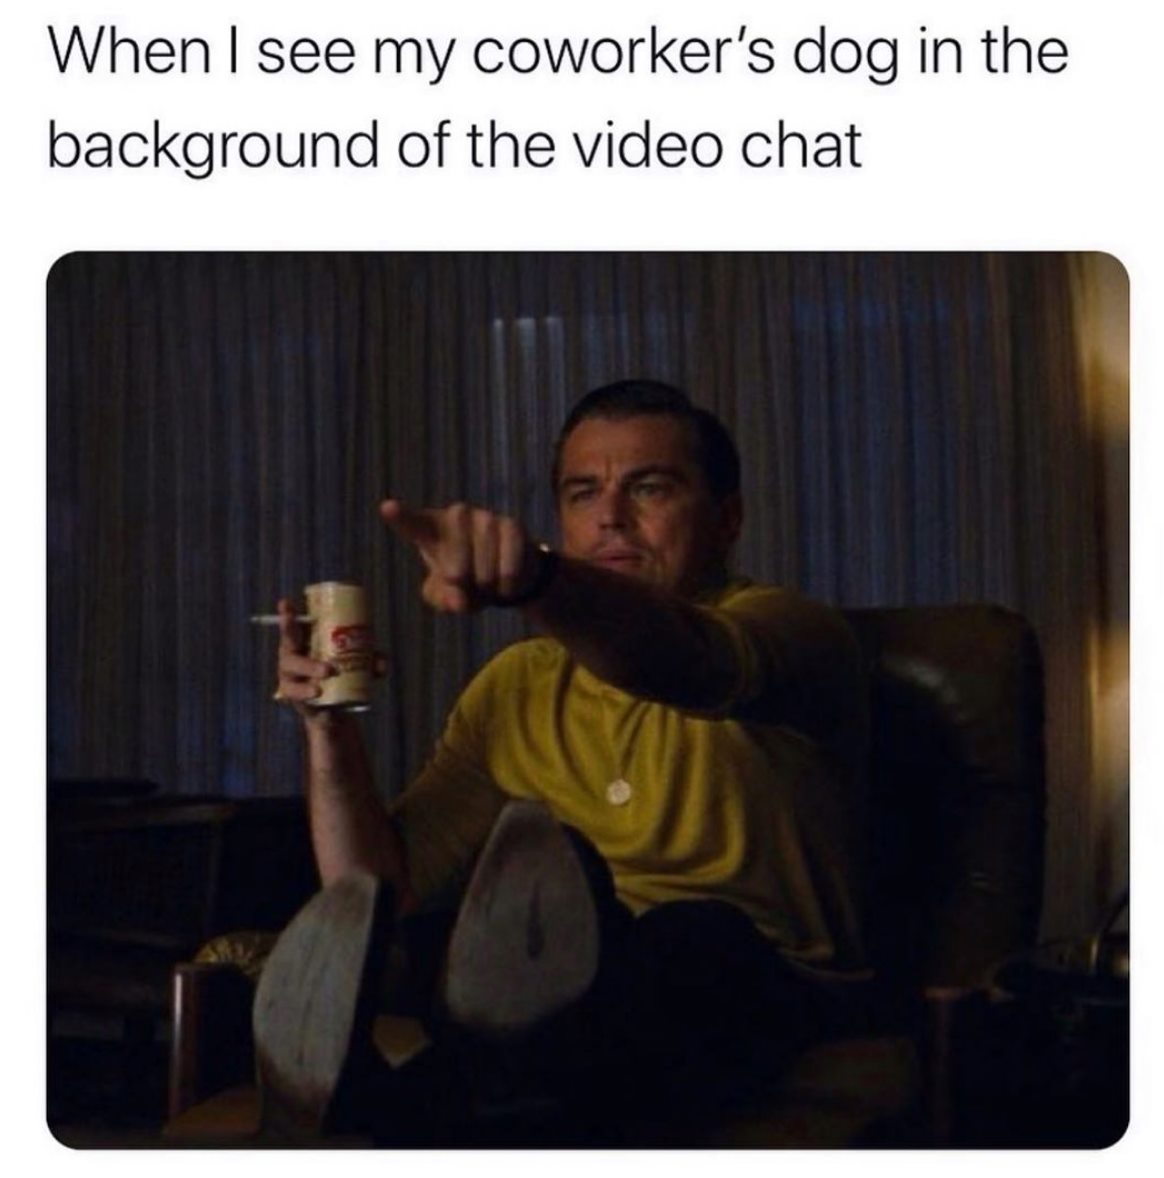 actor meme - When I see my coworker's dog in the background of the video chat